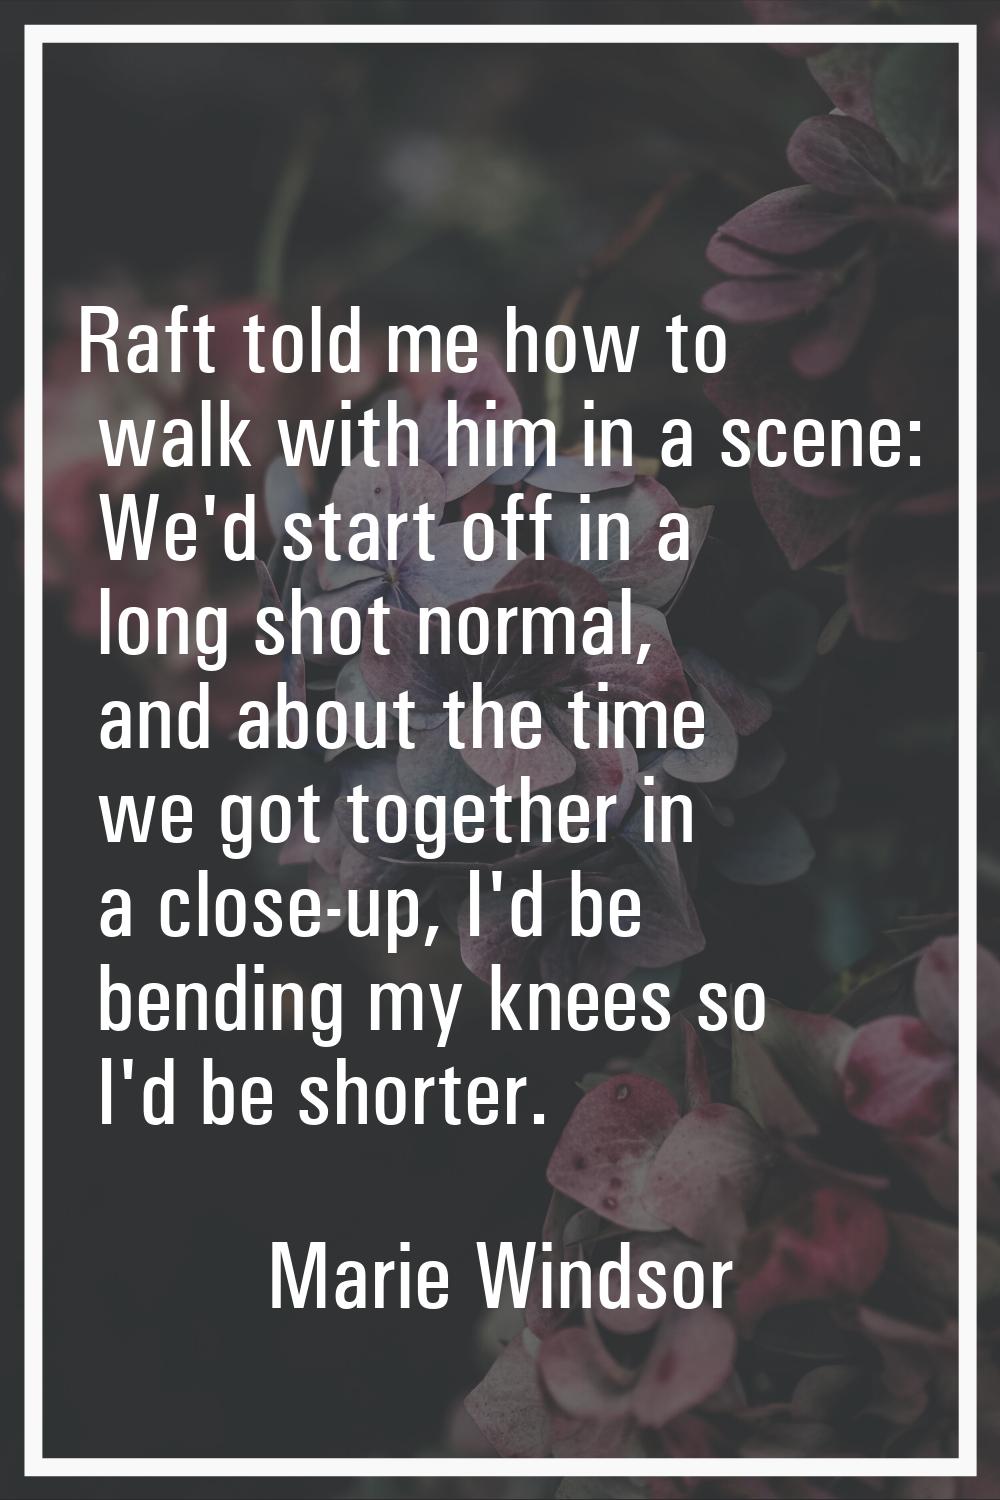 Raft told me how to walk with him in a scene: We'd start off in a long shot normal, and about the t